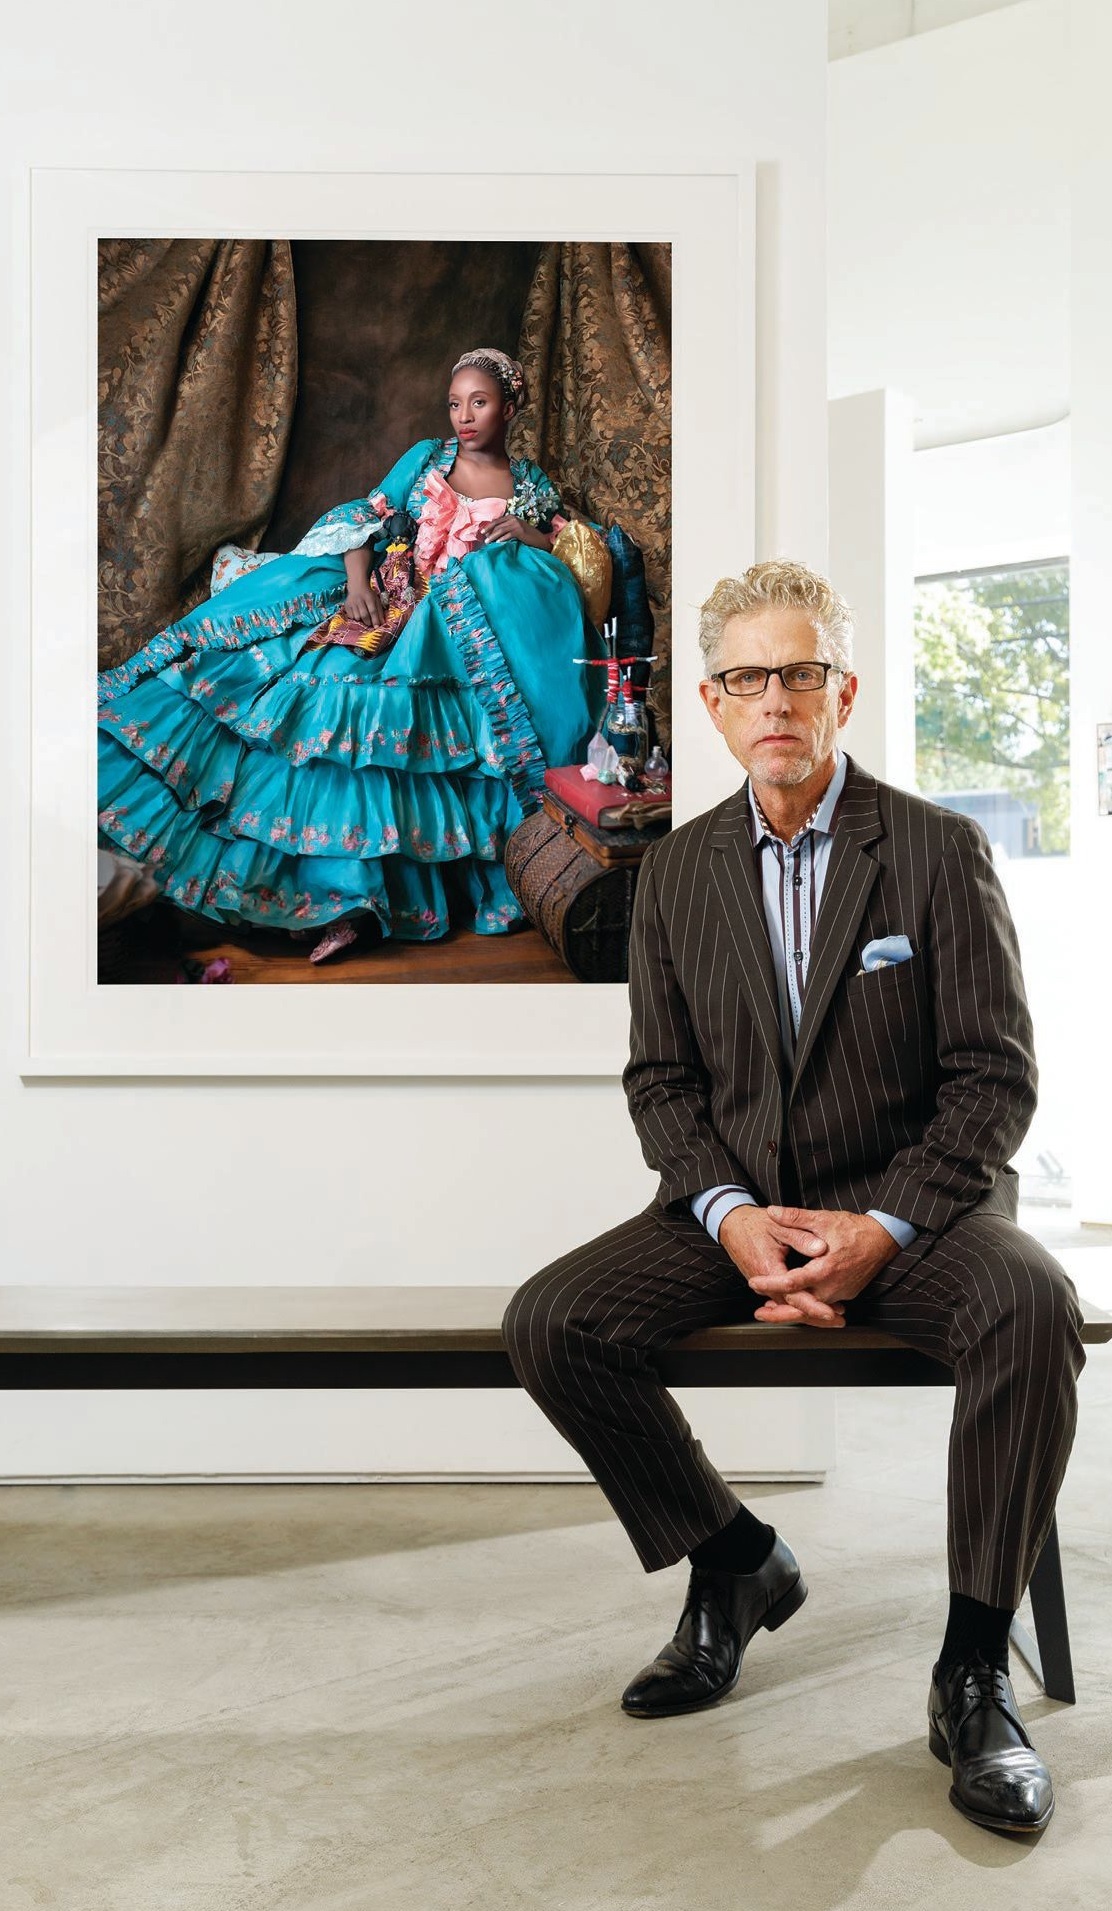 Alan Avery with a work by Fabiola Jean-Louis. PHOTOGRAPHY BY PATRICK HEAGNEY